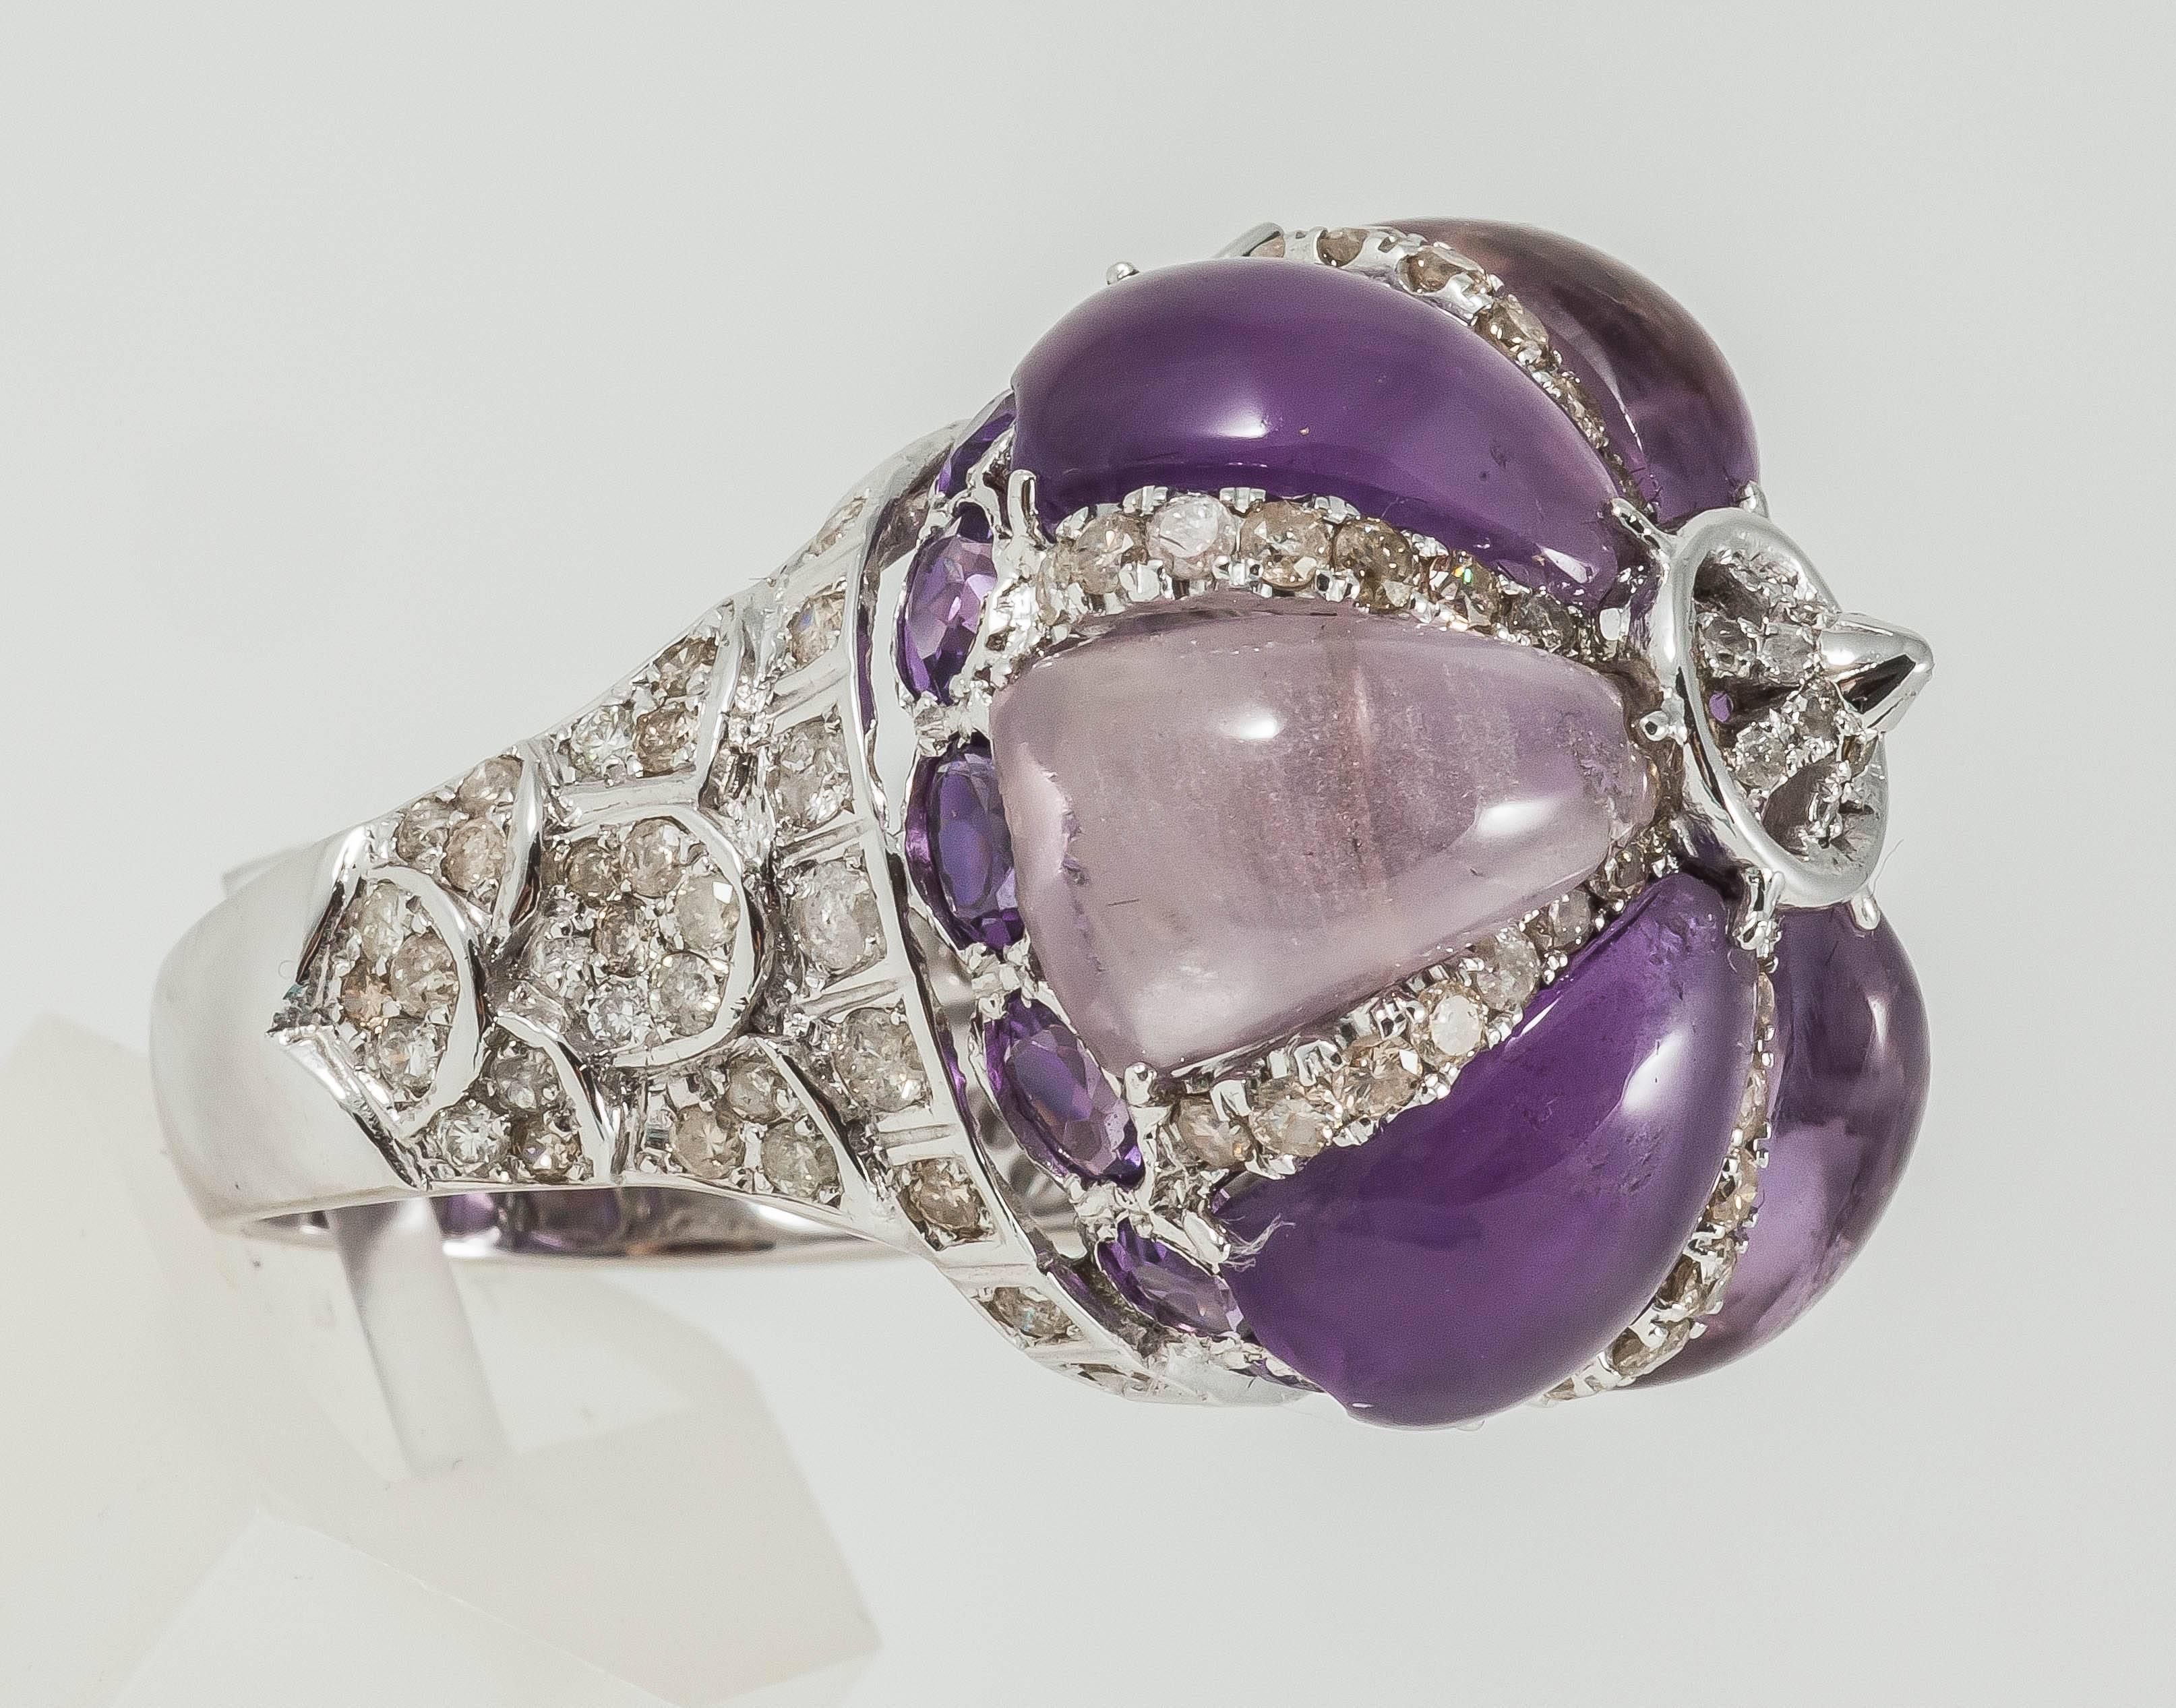 Dome inspired Ring adorned in Cabochon Amethyst & Diamonds

18K White Gold: 15.35gms
Diamond: 1.4cts
Amethyst: 82.4cts